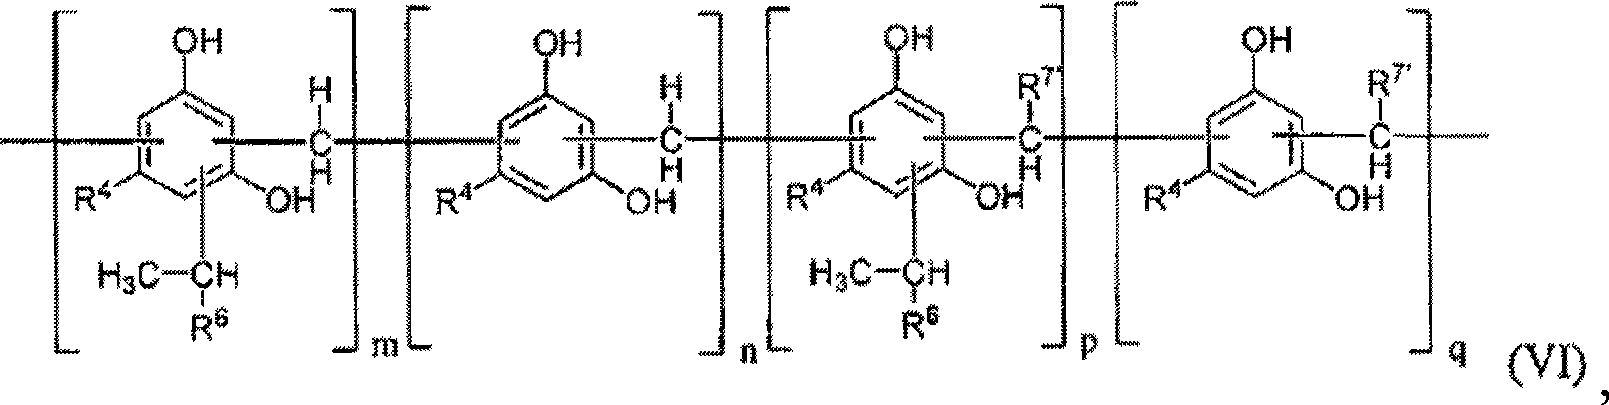 Modified alkylresorcinol resins and applications thereof